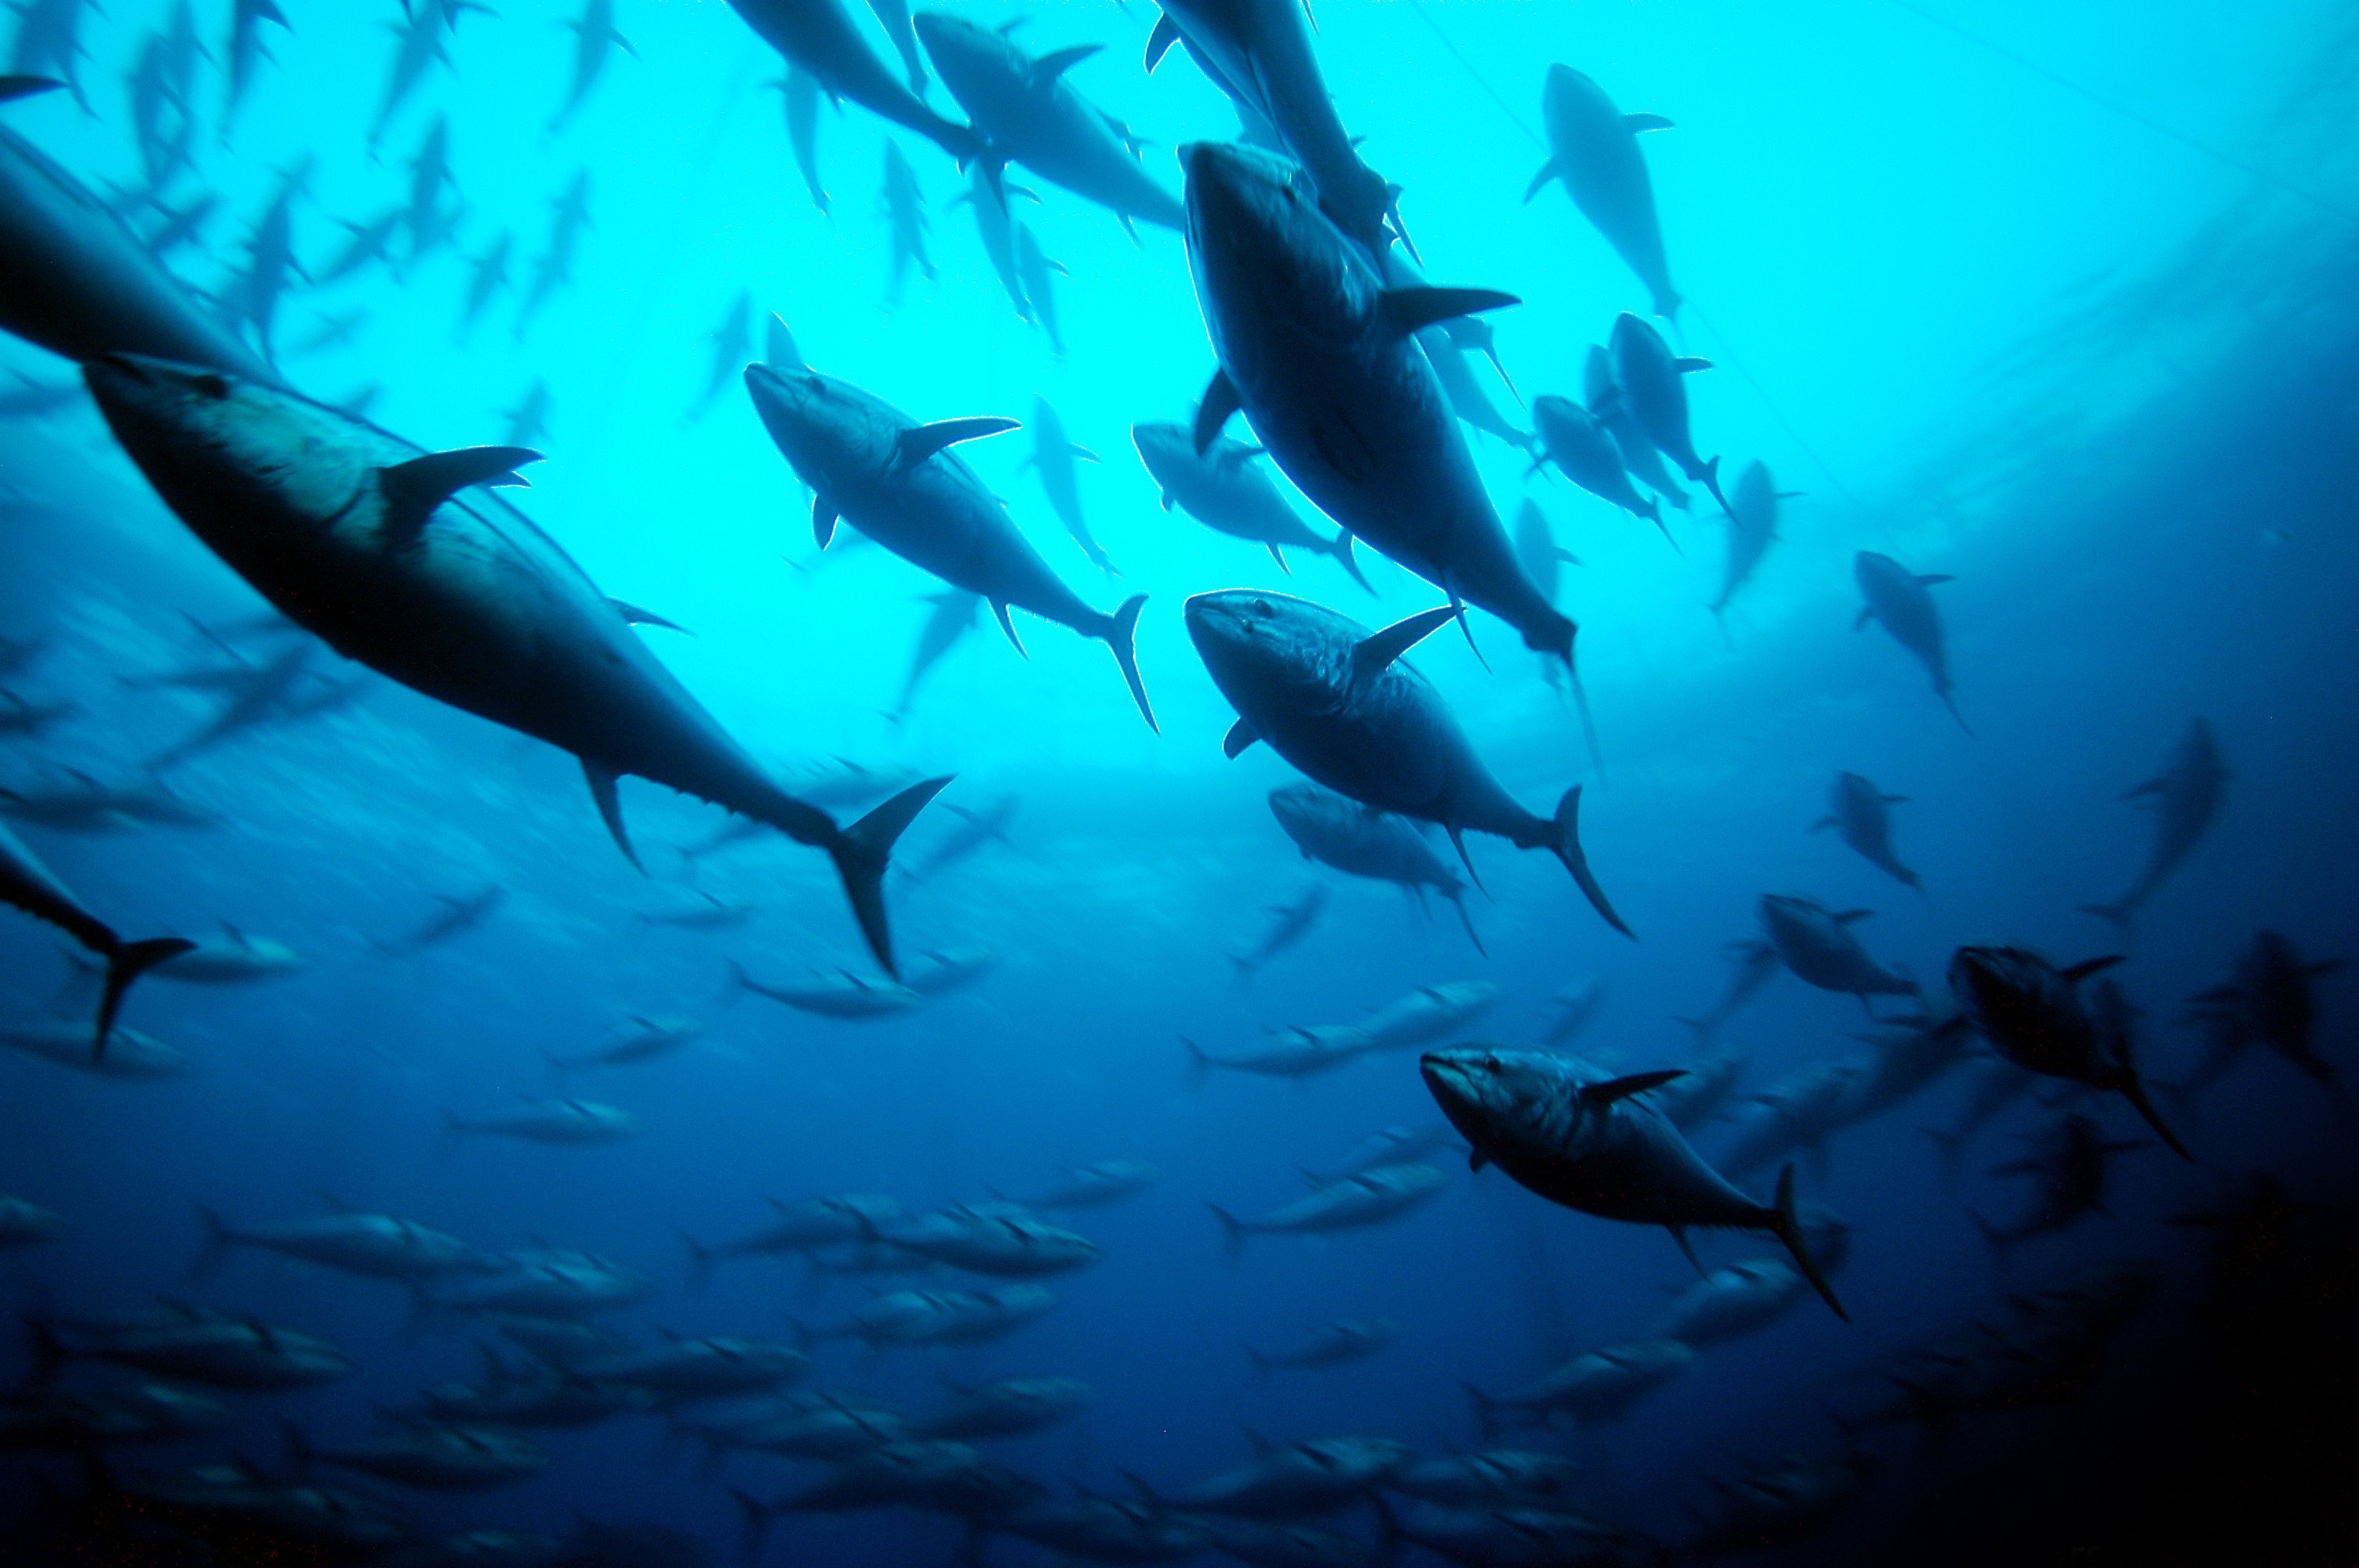 Bluefin tuna in the Mediterranean Sea. Sustainable fishing, and open-water farming, of the fish have increased its population and made Atlantic bluefin tuna an ethical food choice, a Spanish food importer in Hong Kong says. Photo: Getty Images